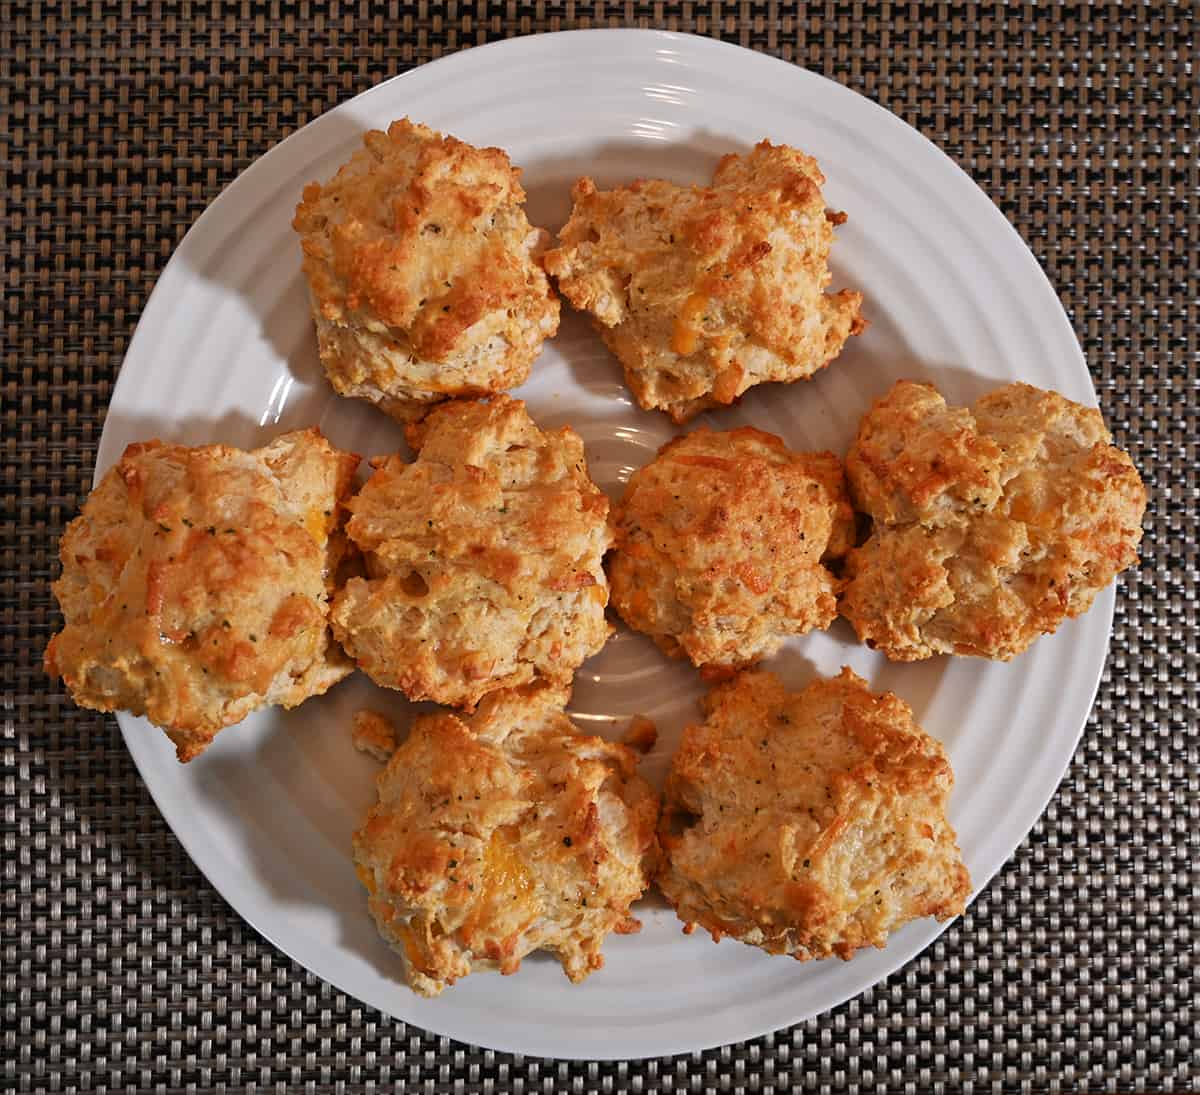 Top down image of a plate of baked biscuits.